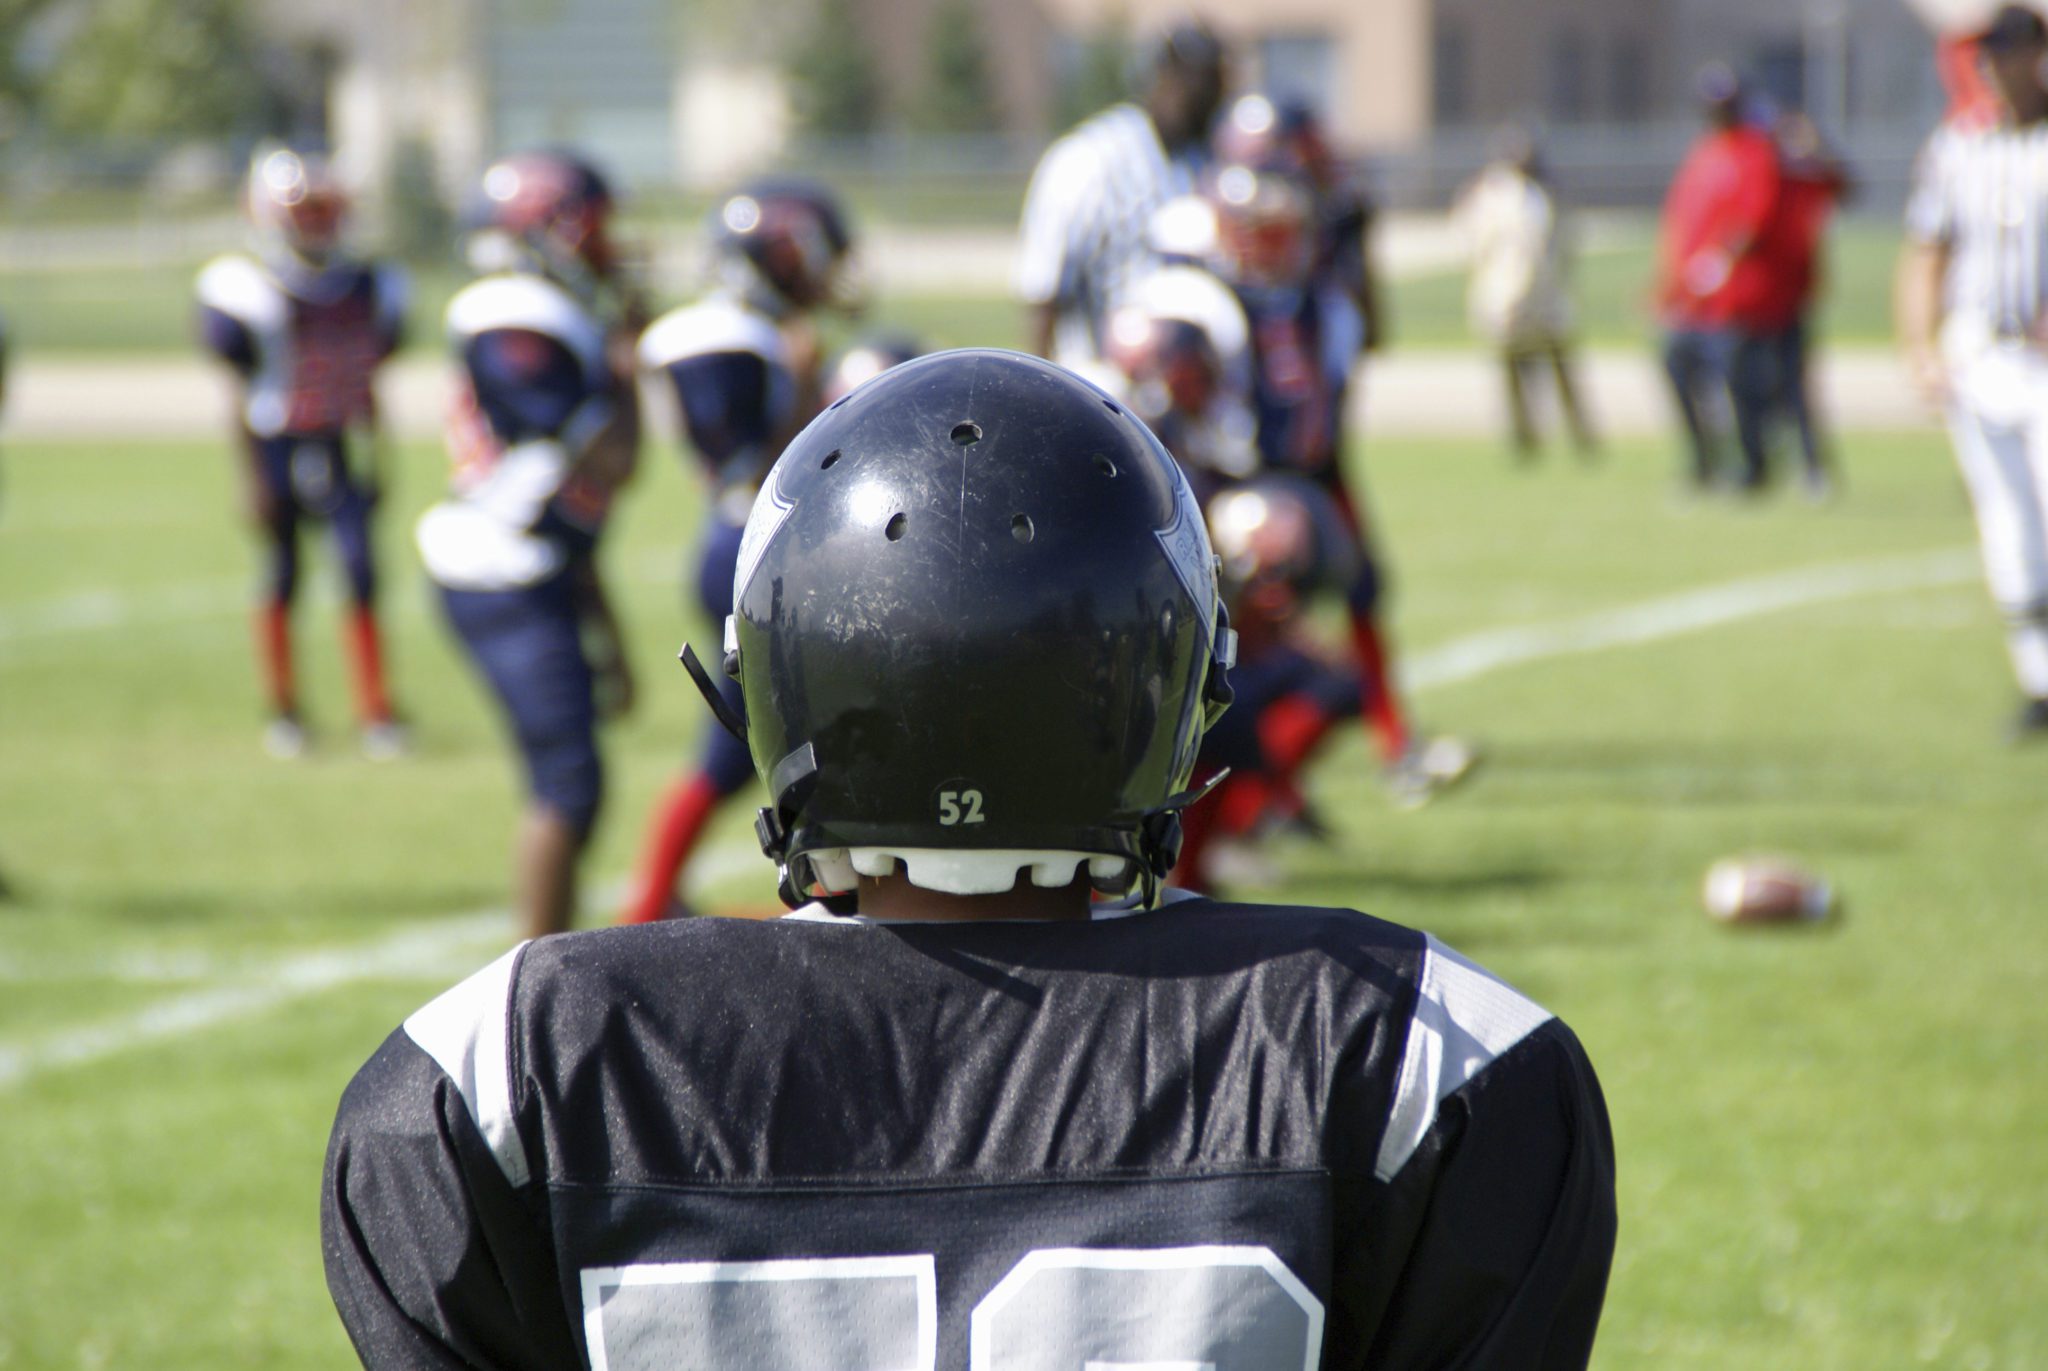 Is tackle football safe for pre-teens?